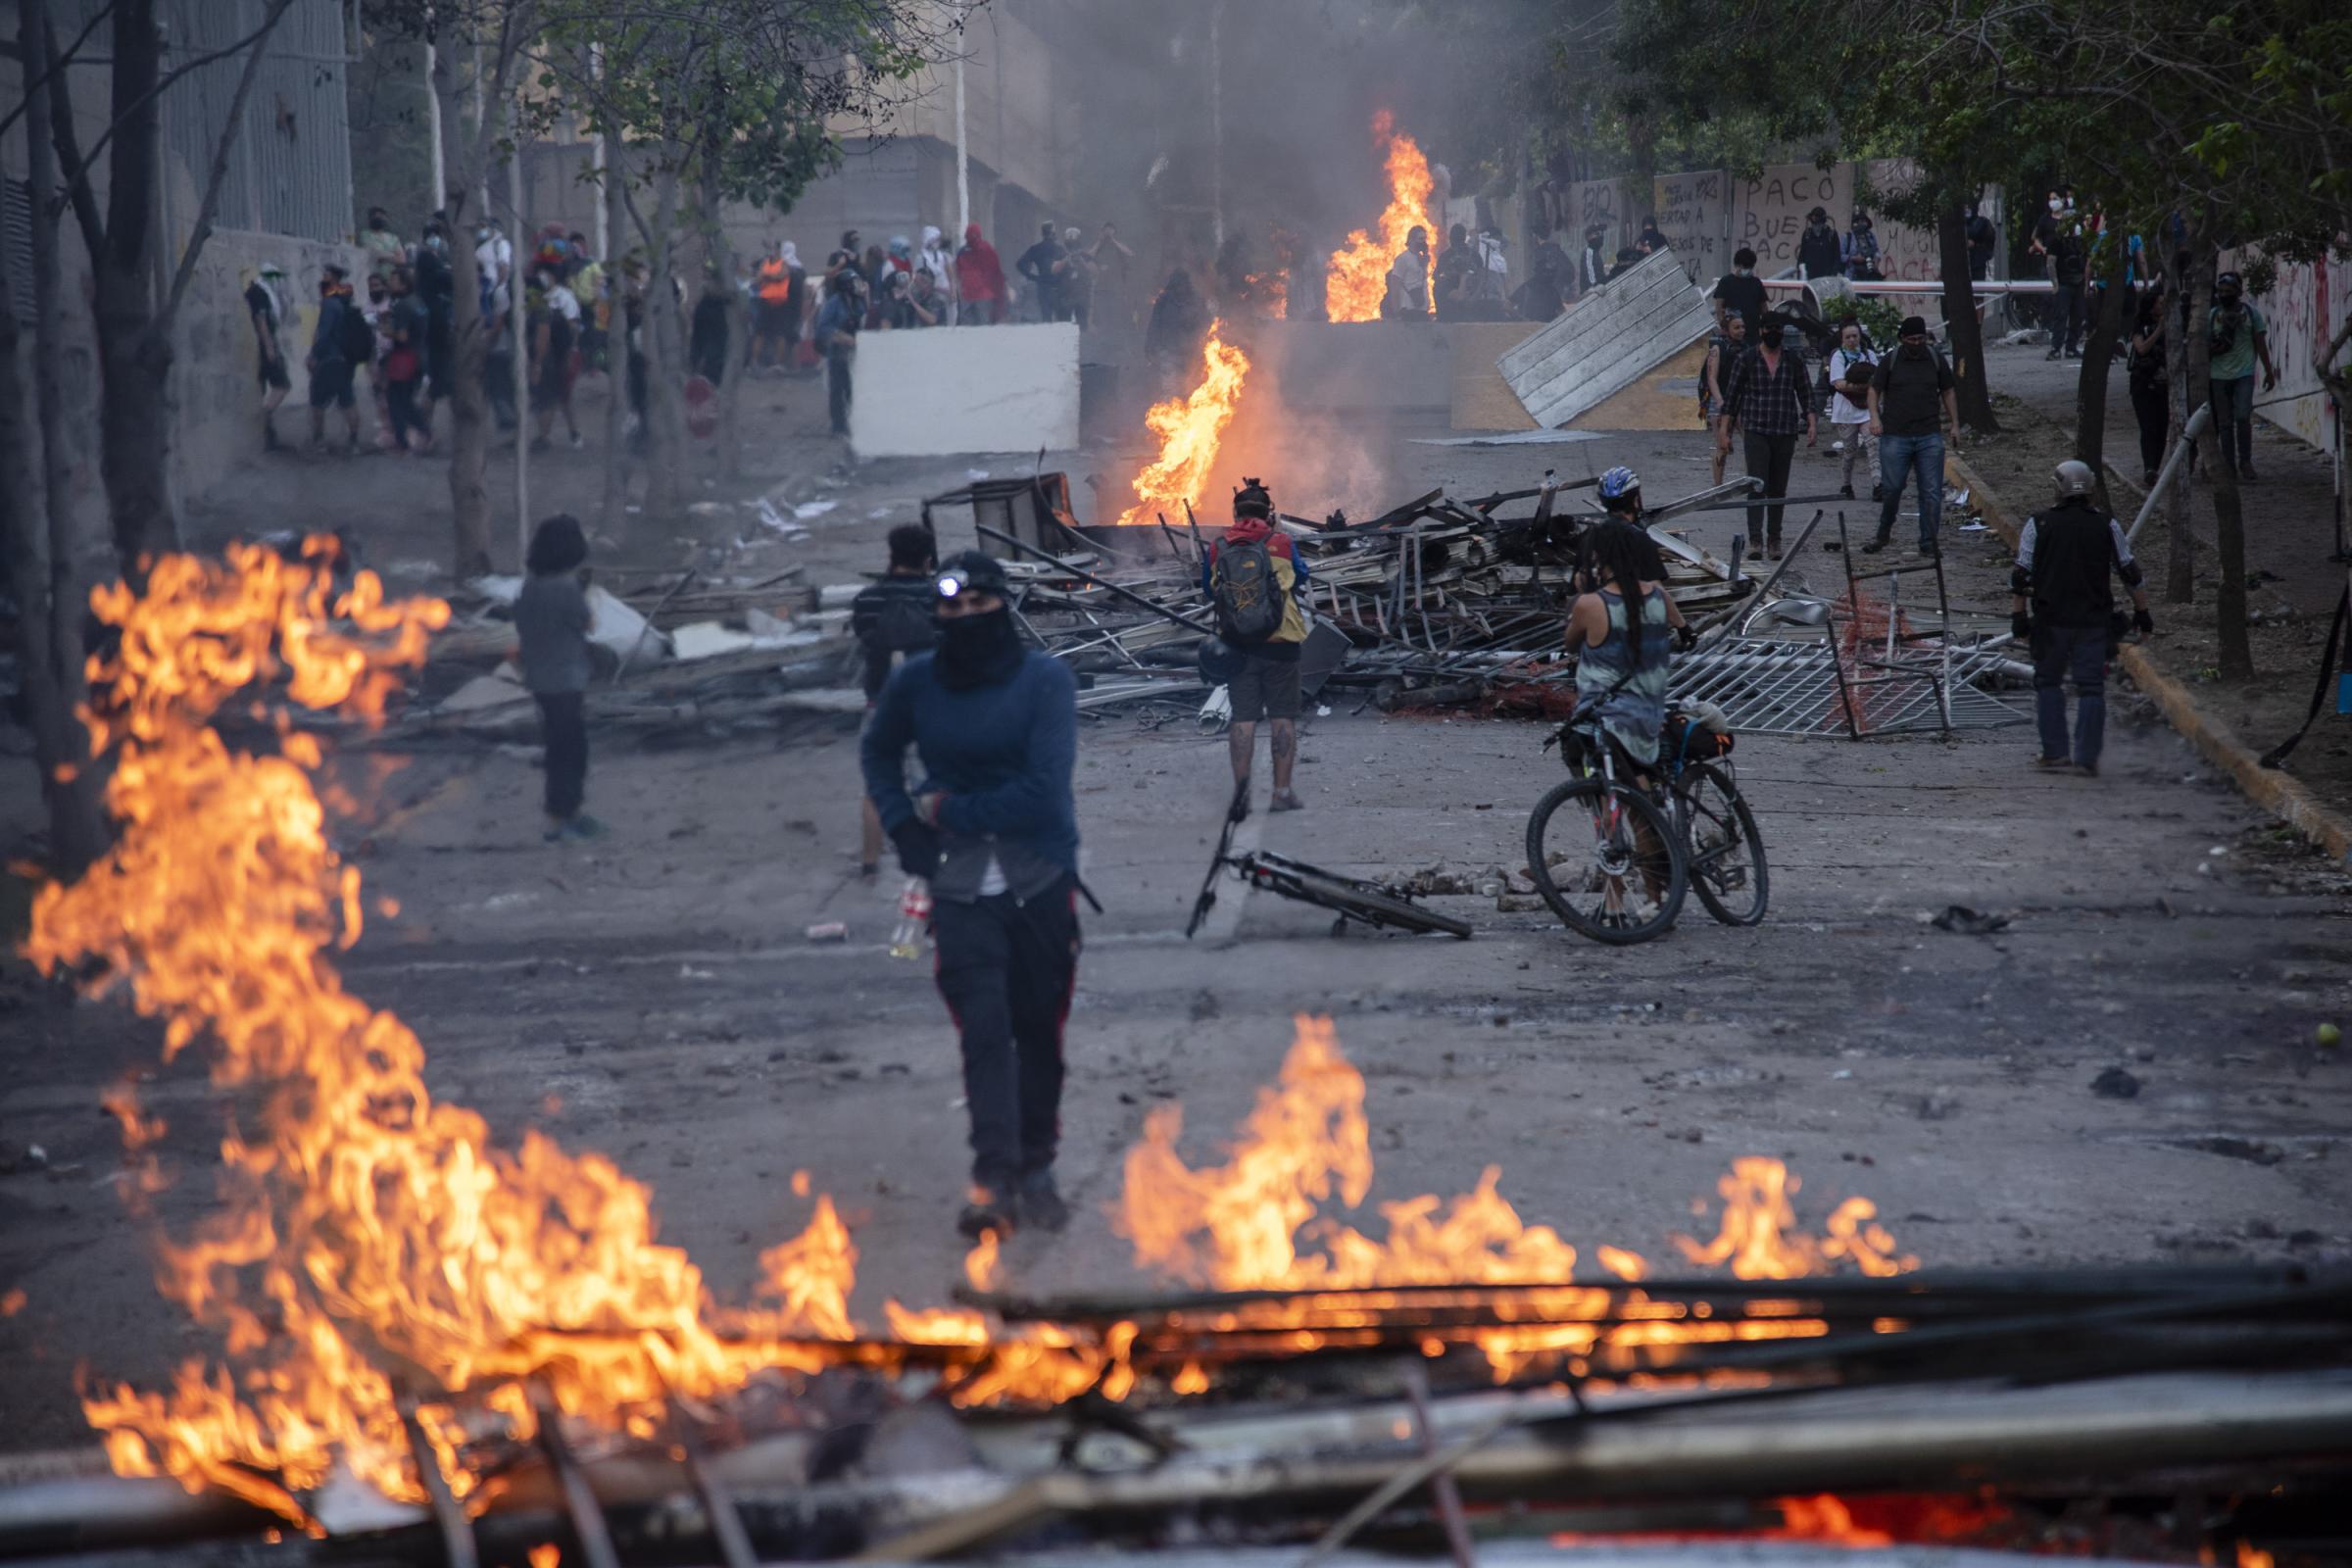 CHILE: From politics to social unrest.